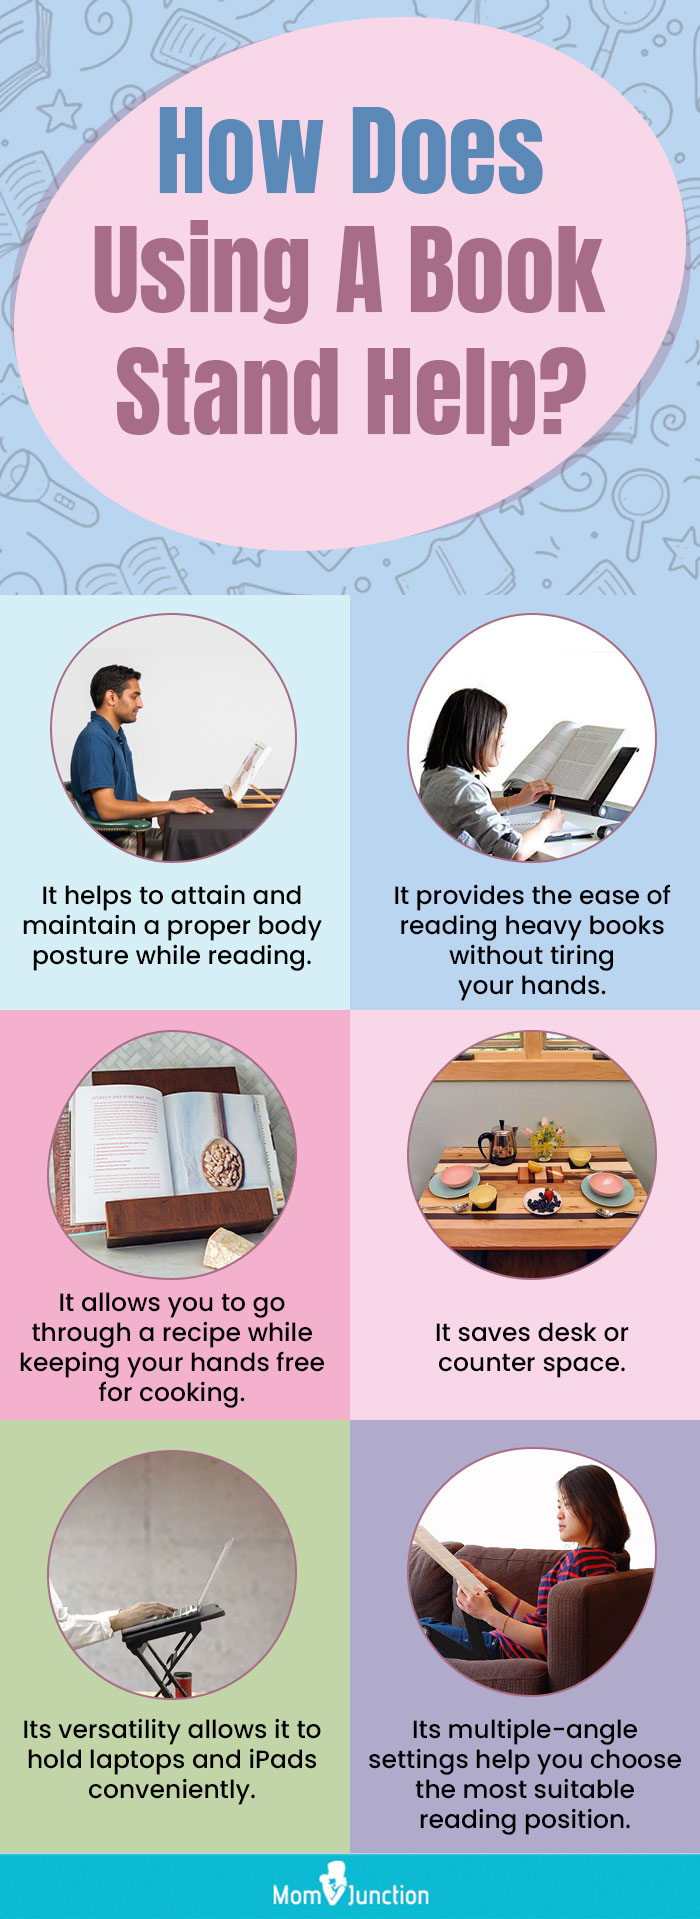 How Does Using A Book Stand Help? (infographic)